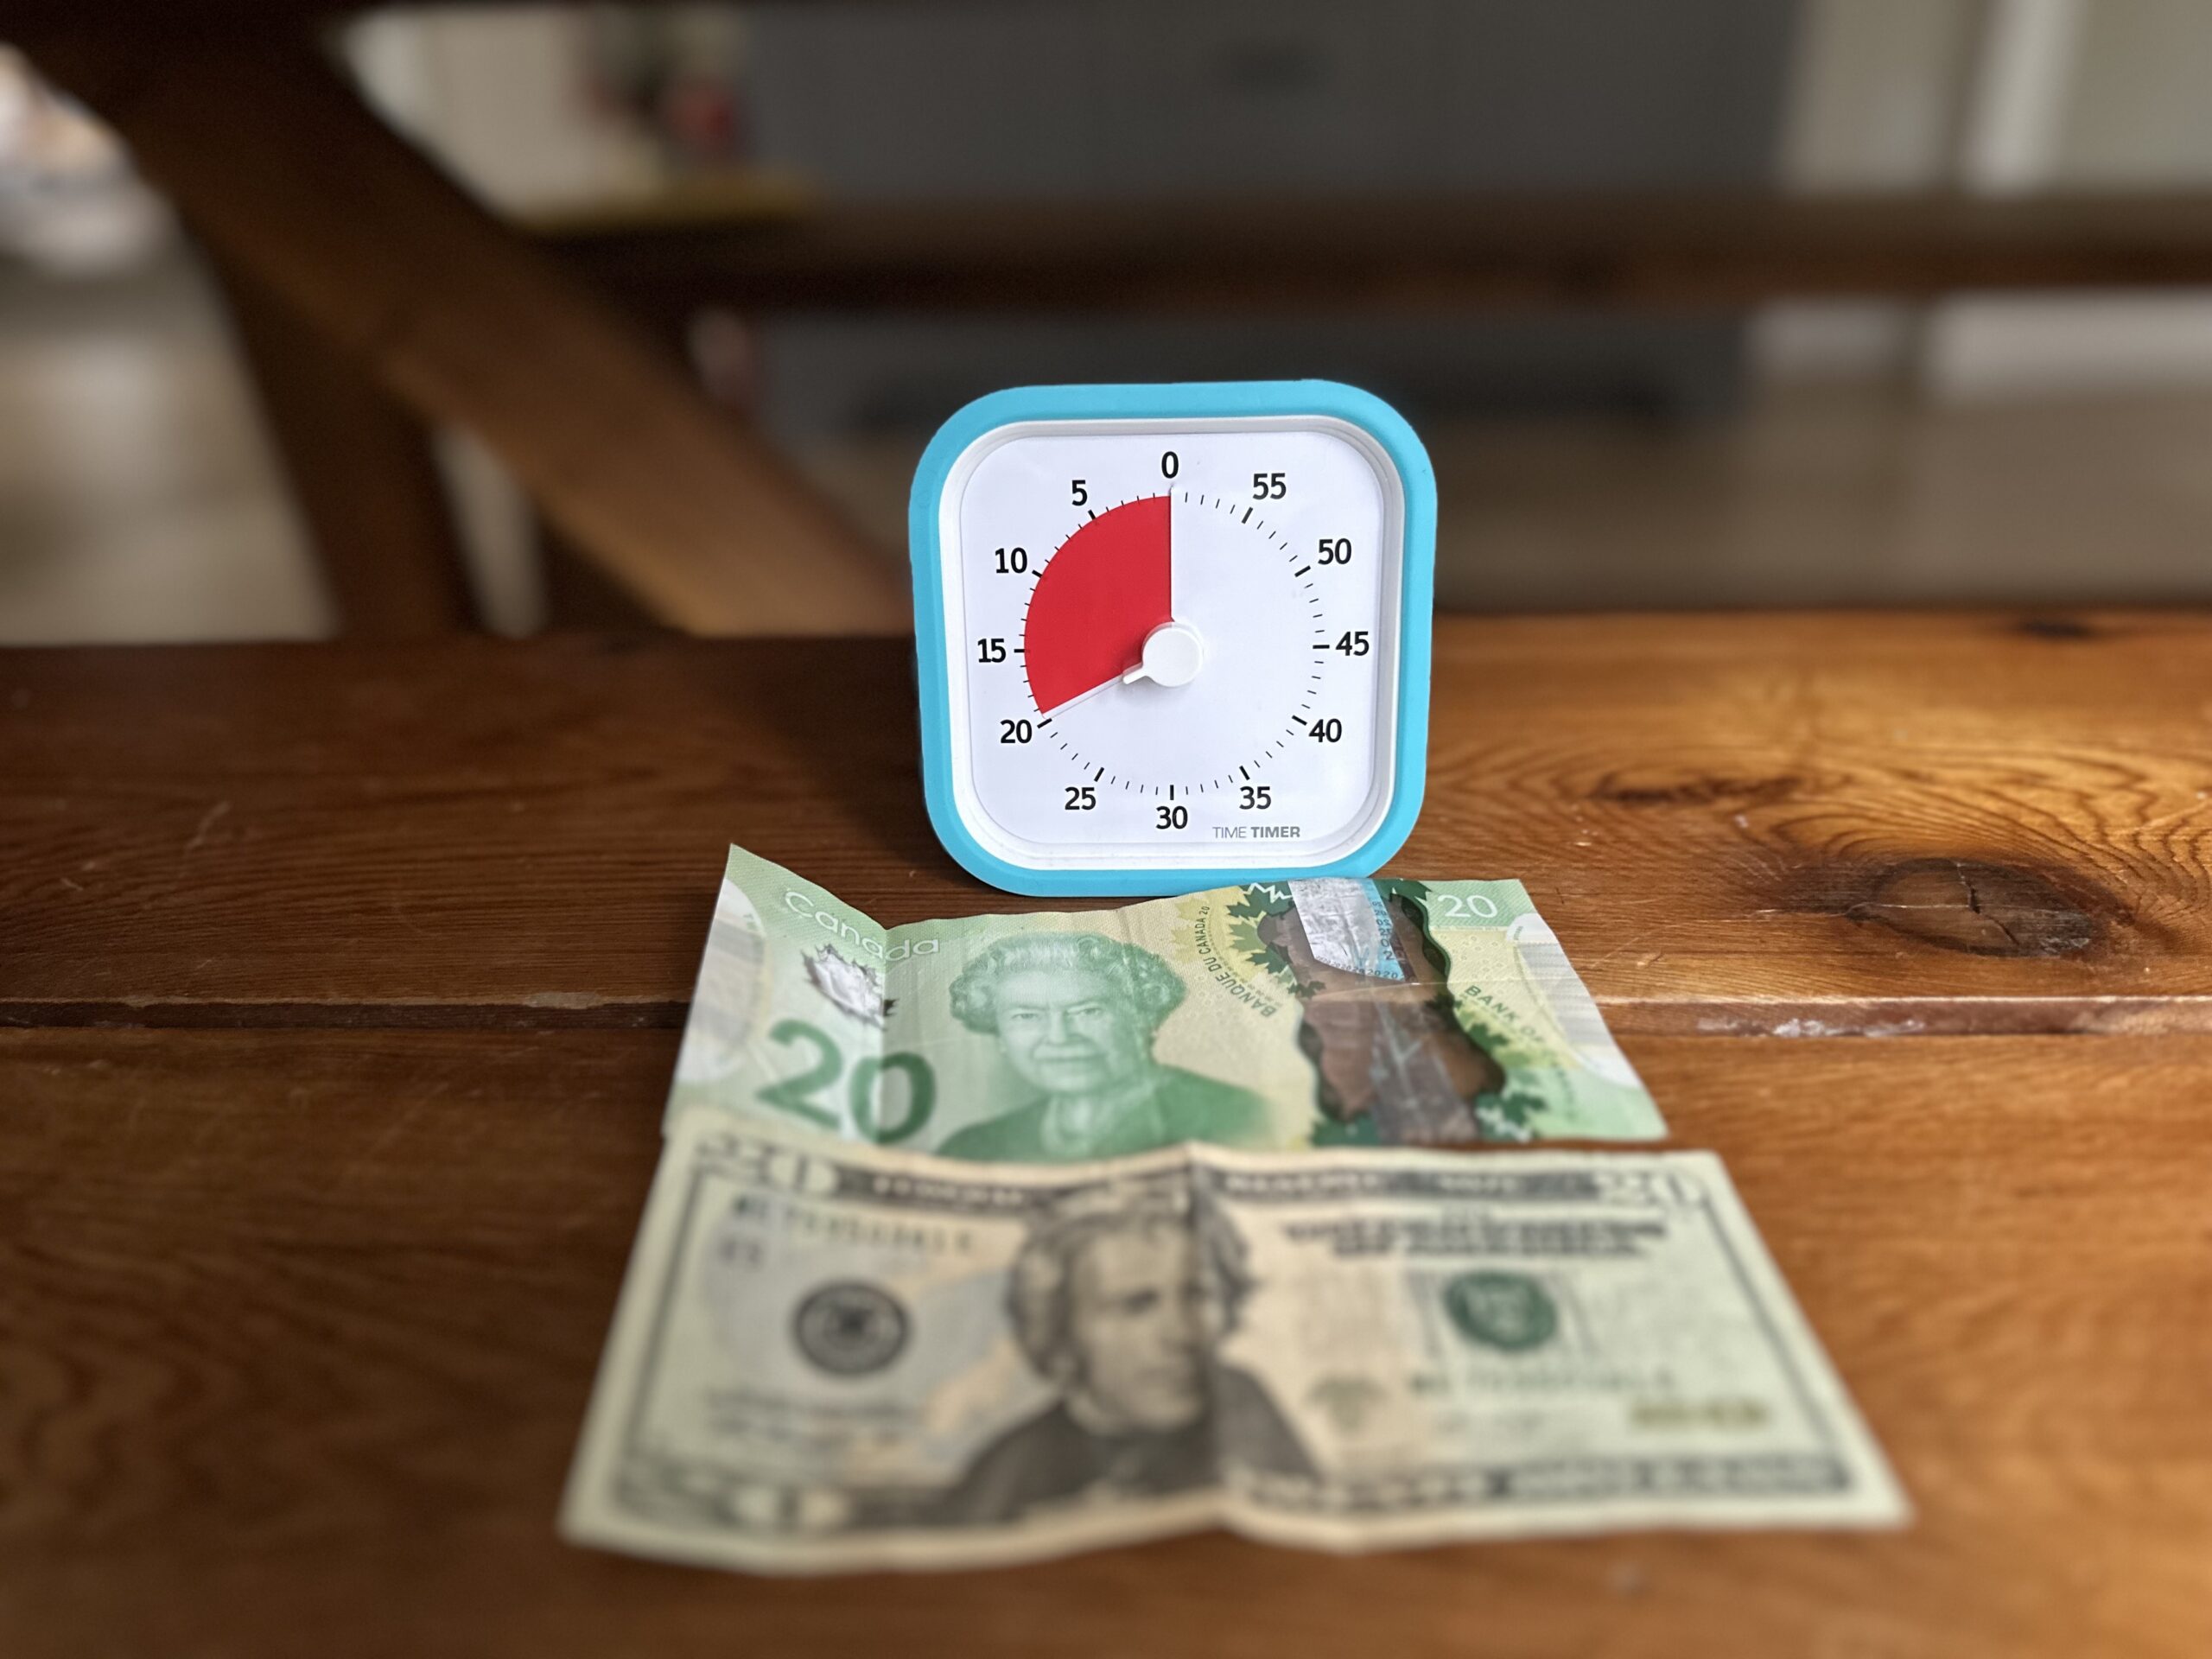 20 minute timer with a $20 Canadian bill and a $20 American bill is a great minimalist rule to simplify life